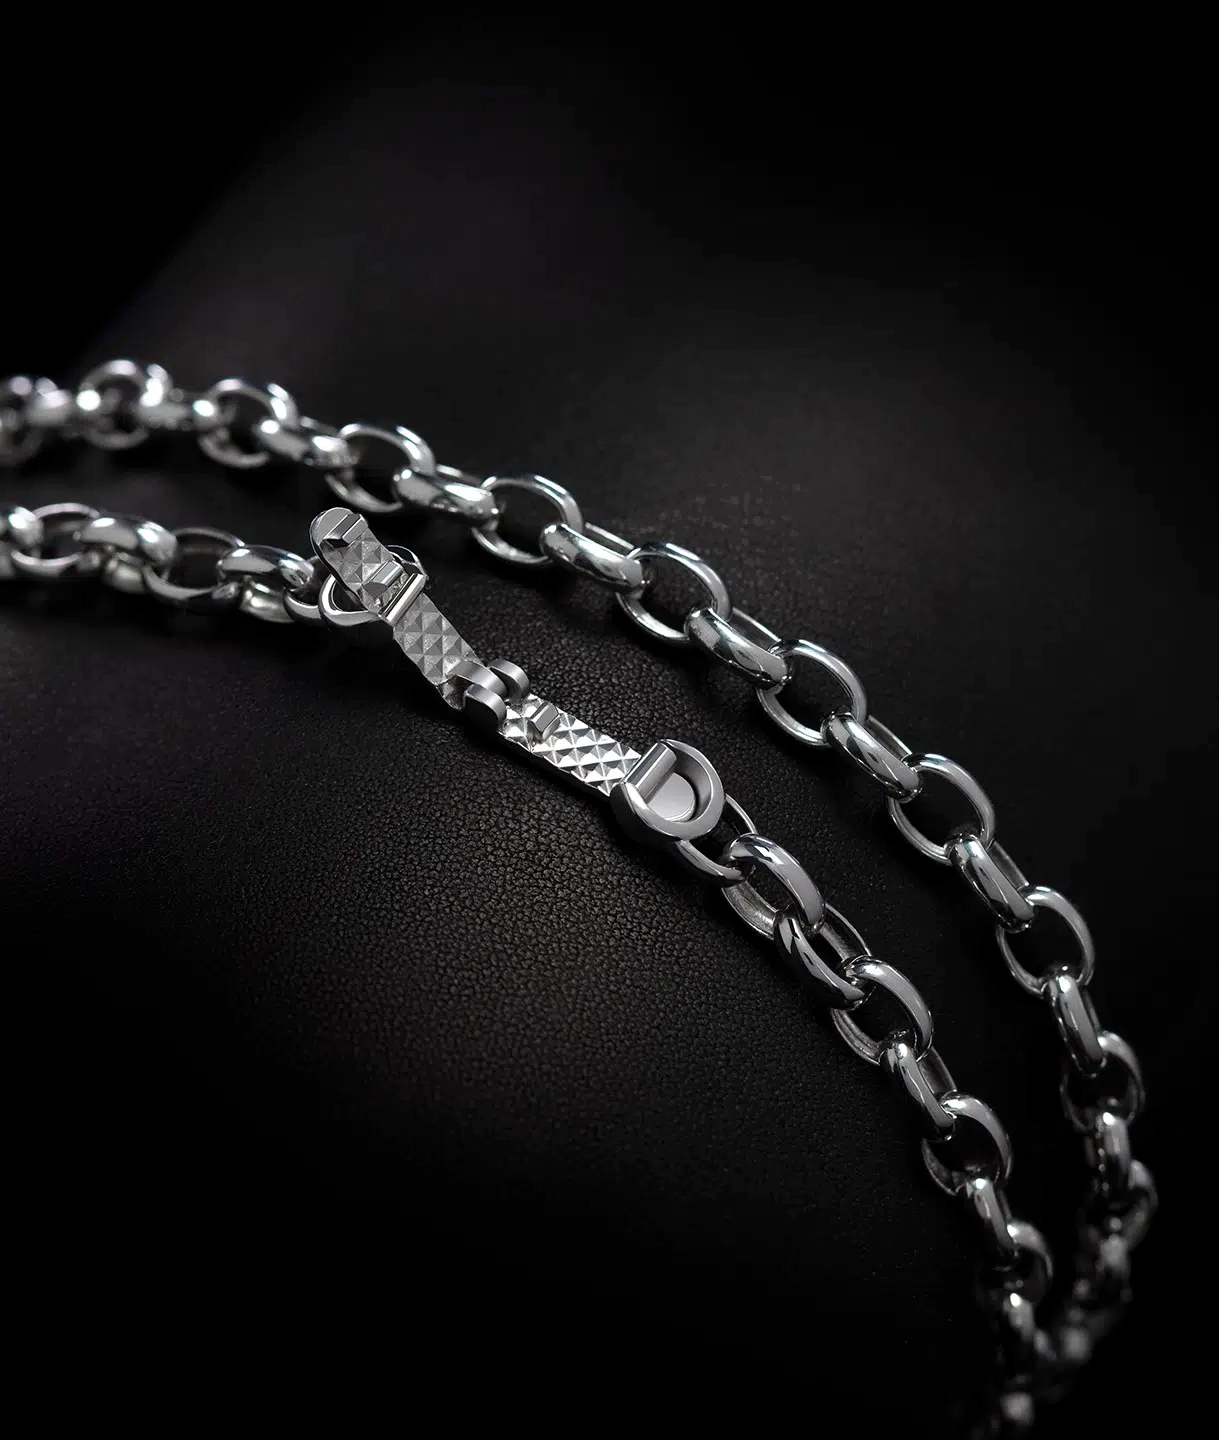 A clasp of a men's platinum rolo link chain necklace designed by ByEnzo Jewelry in a black background